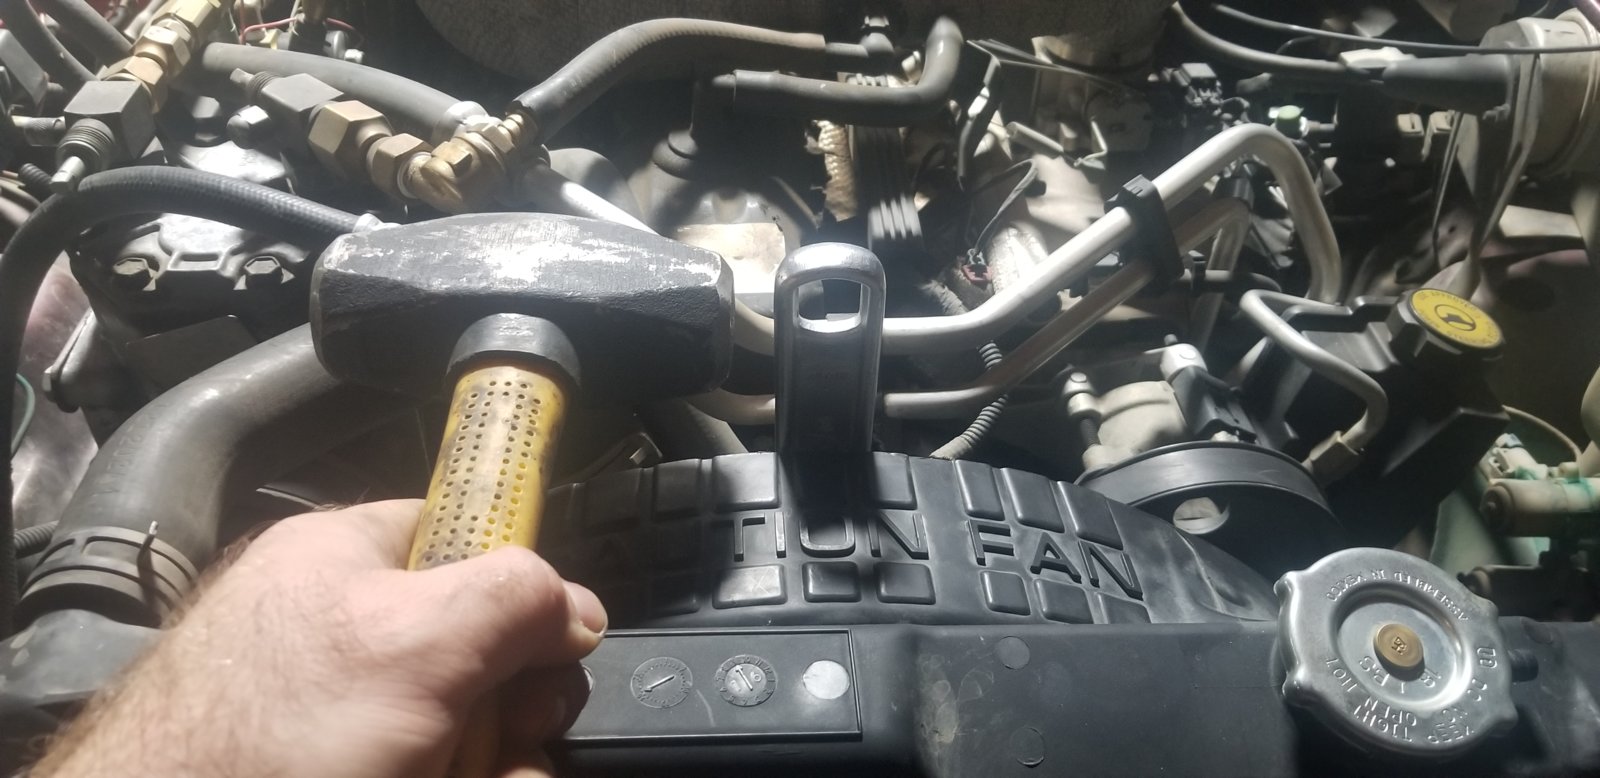 Fan clutch removal: which direction? | Jeep Wrangler TJ Forum